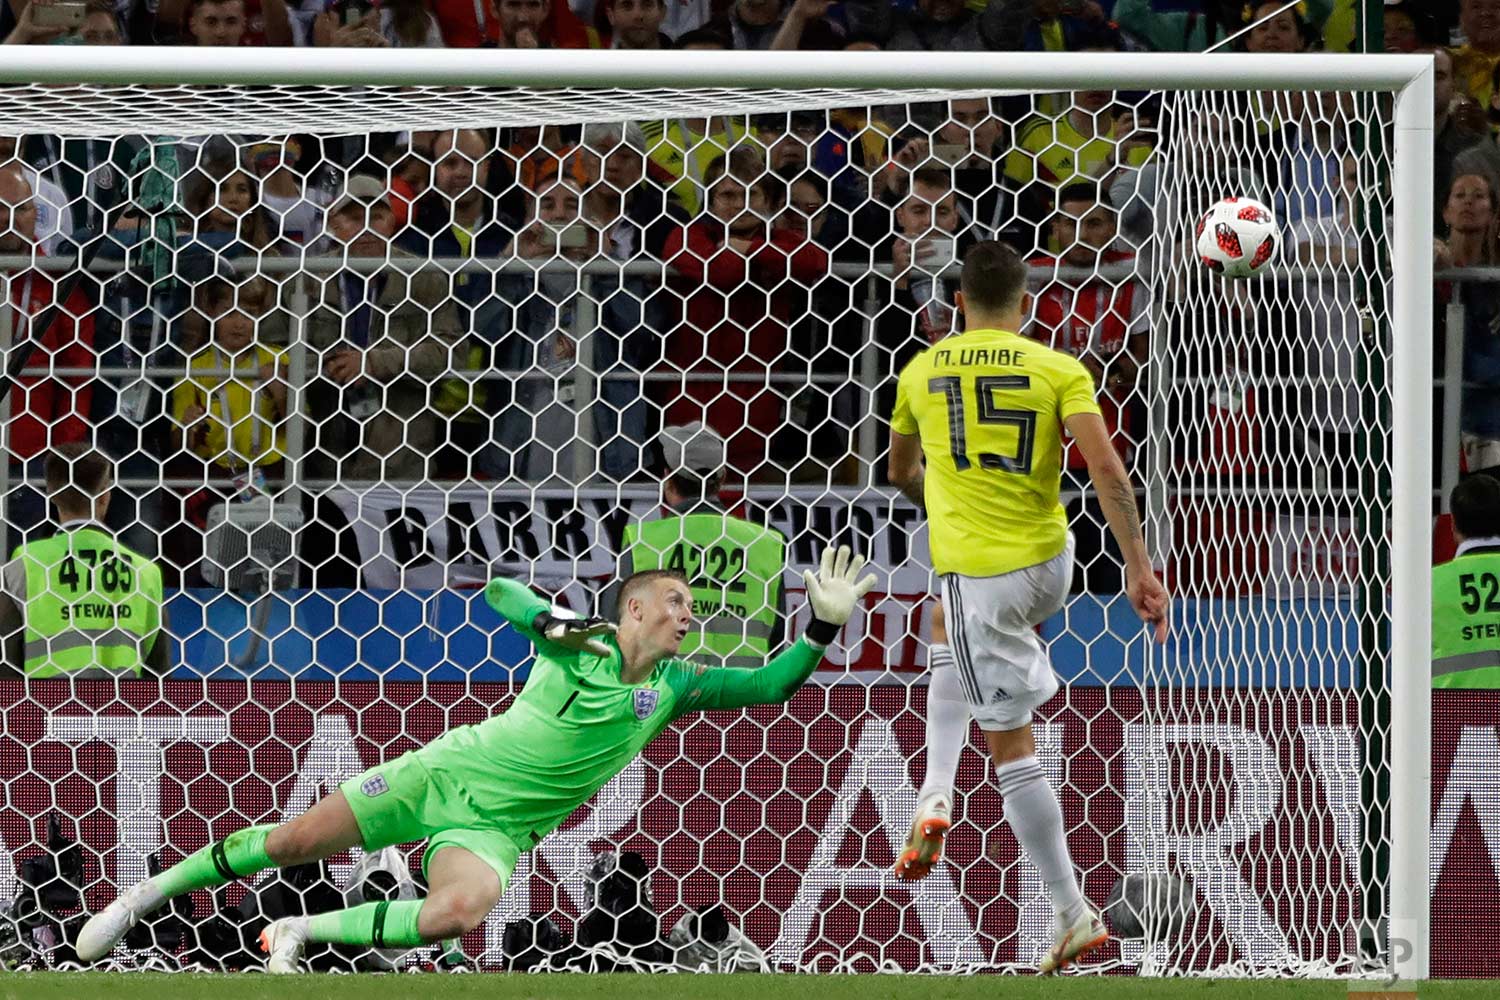  Colombia's Mateus Uribe fails to score on a penalty in the round of 16 match between Colombia and England at the 2018 soccer World Cup in the Spartak Stadium, in Moscow, Russia, Tuesday, July 3, 2018. England eliminates Colombia 4-3 on penalties aft